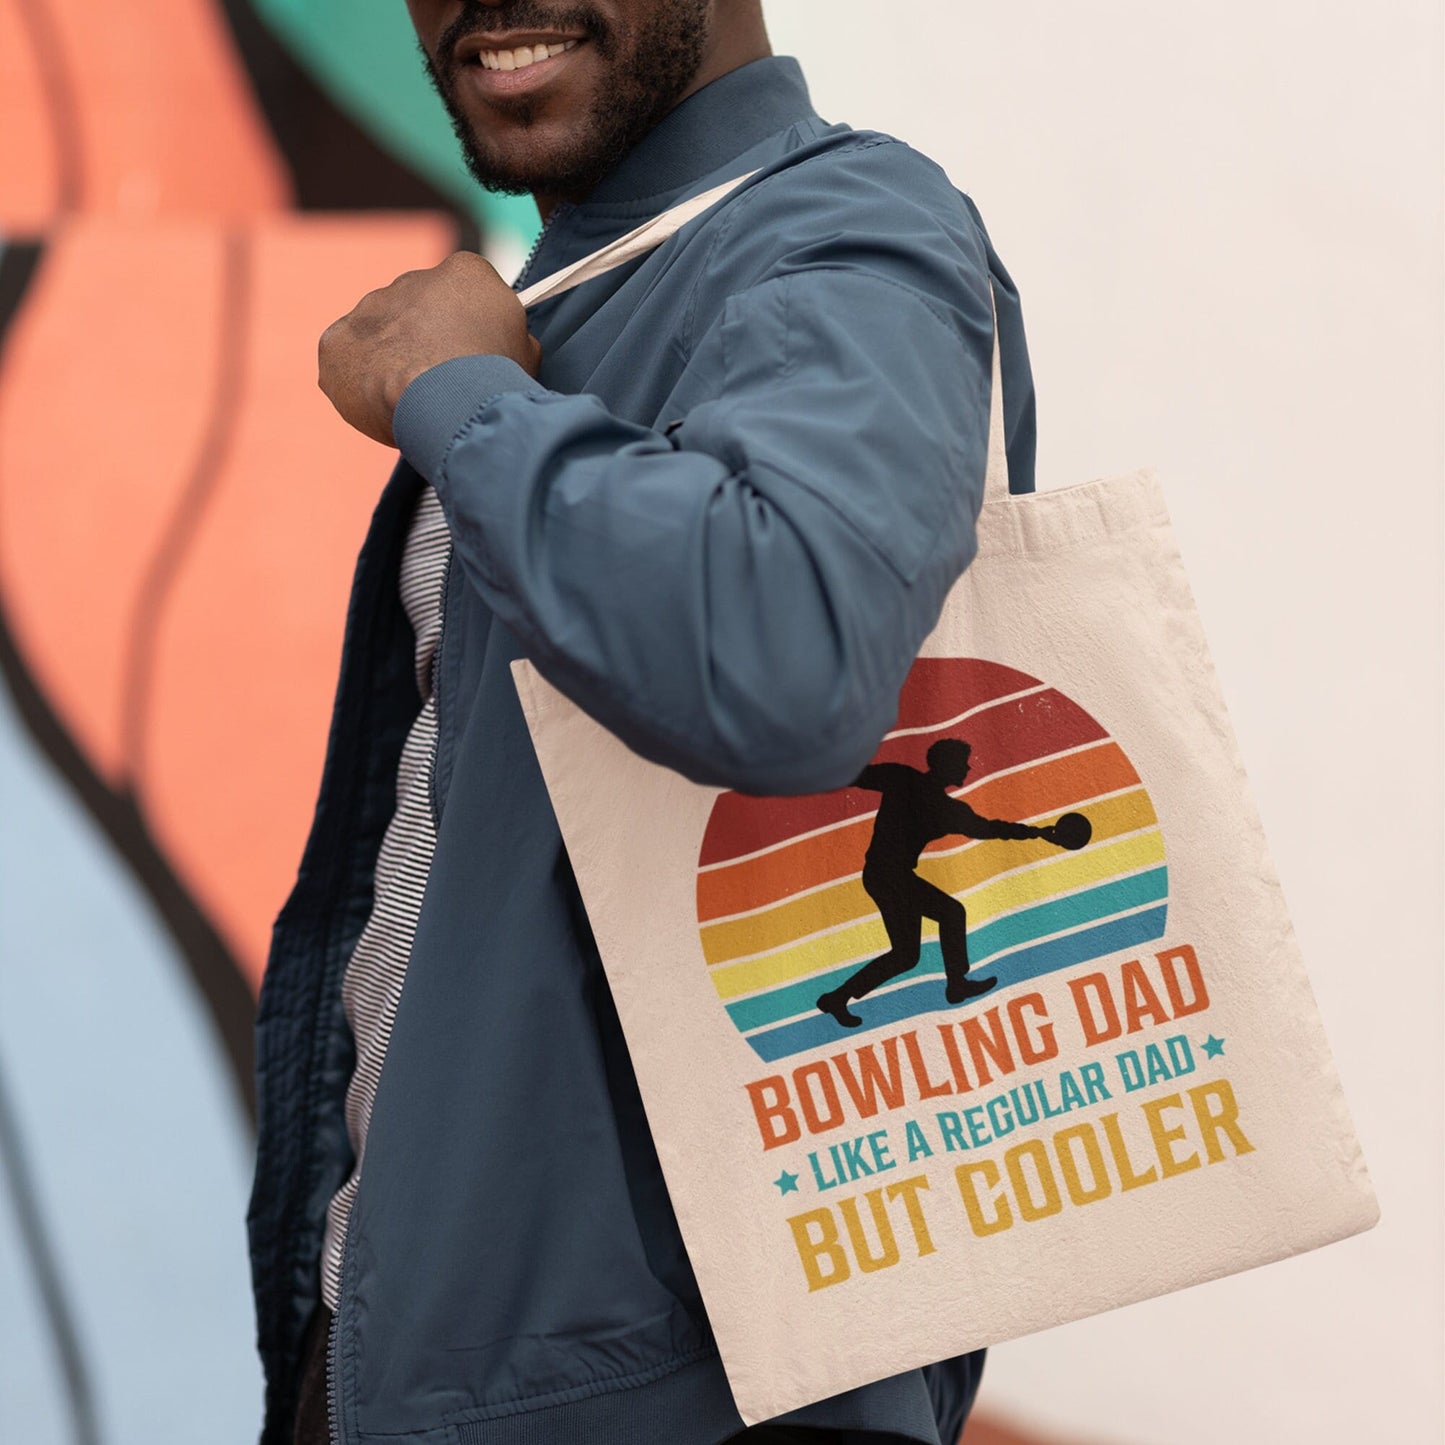 Bowling Dad Like a Regular Dad But Cooler Canvas Tote Bag